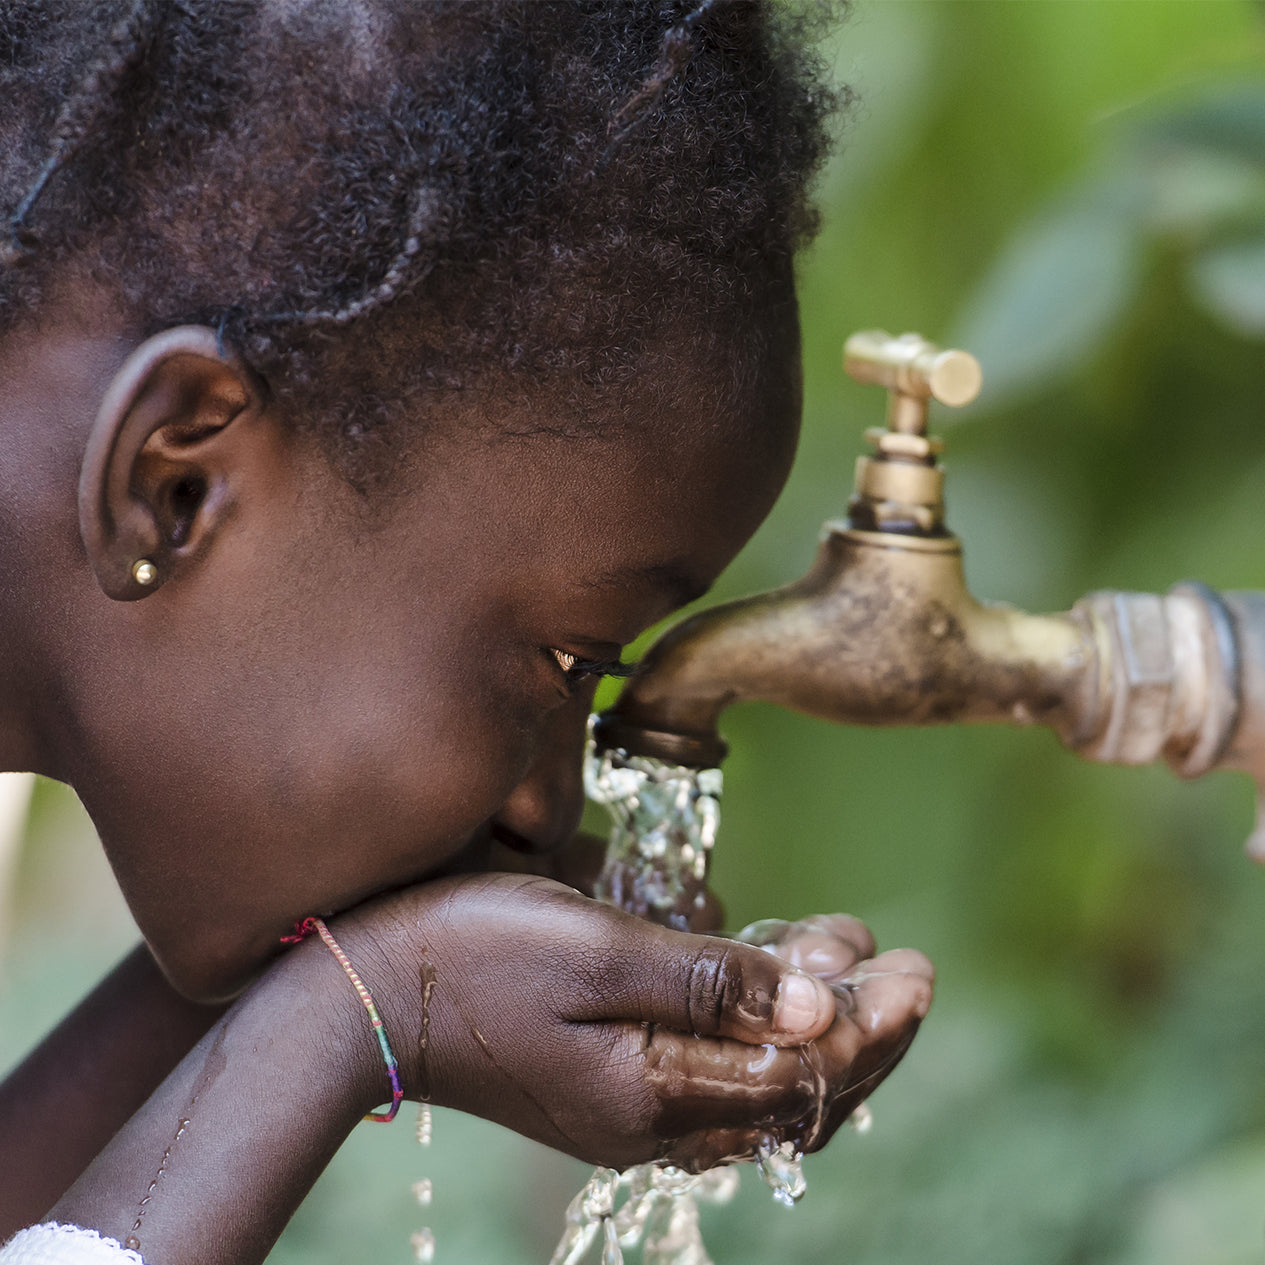 Girl drinking water out of a tap